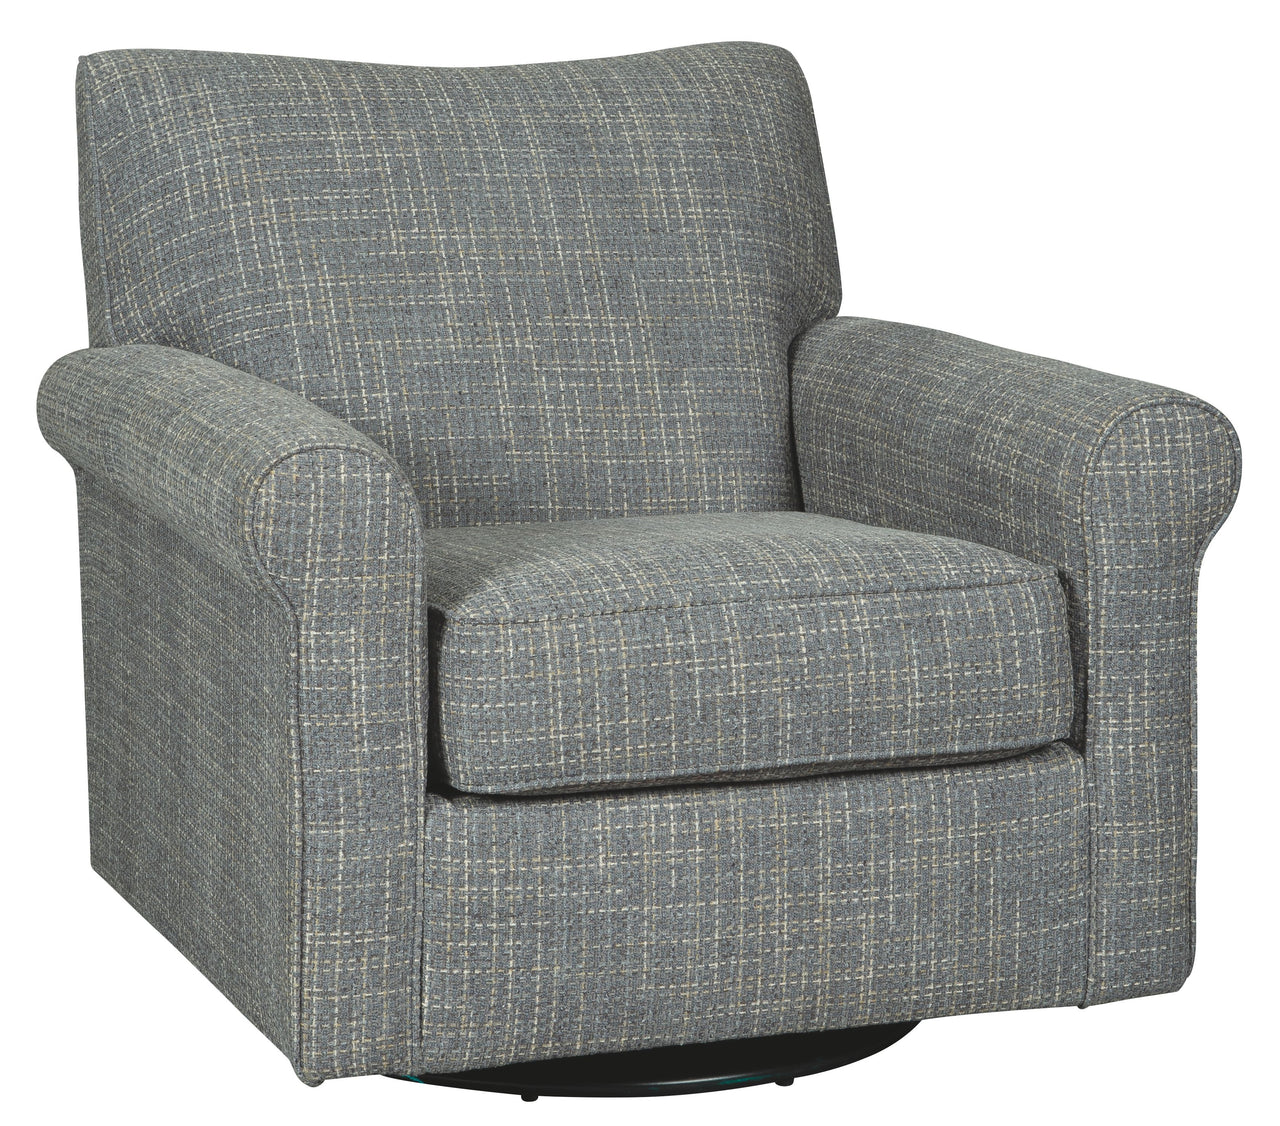 Renley - Ash - Swivel Glider Accent Chair - Tony's Home Furnishings